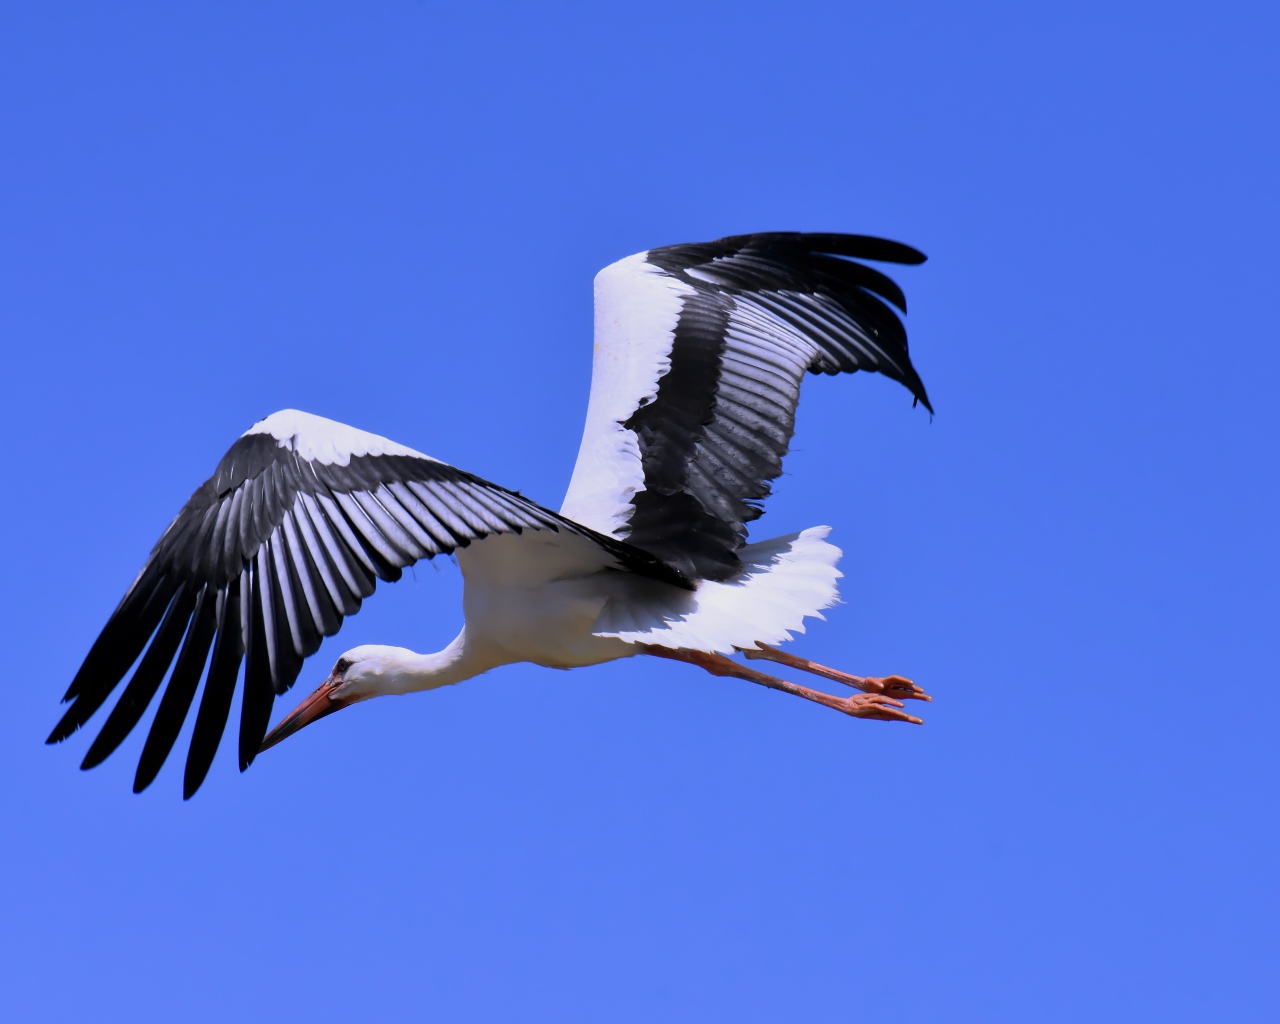 Big stork with black wings on a blue background